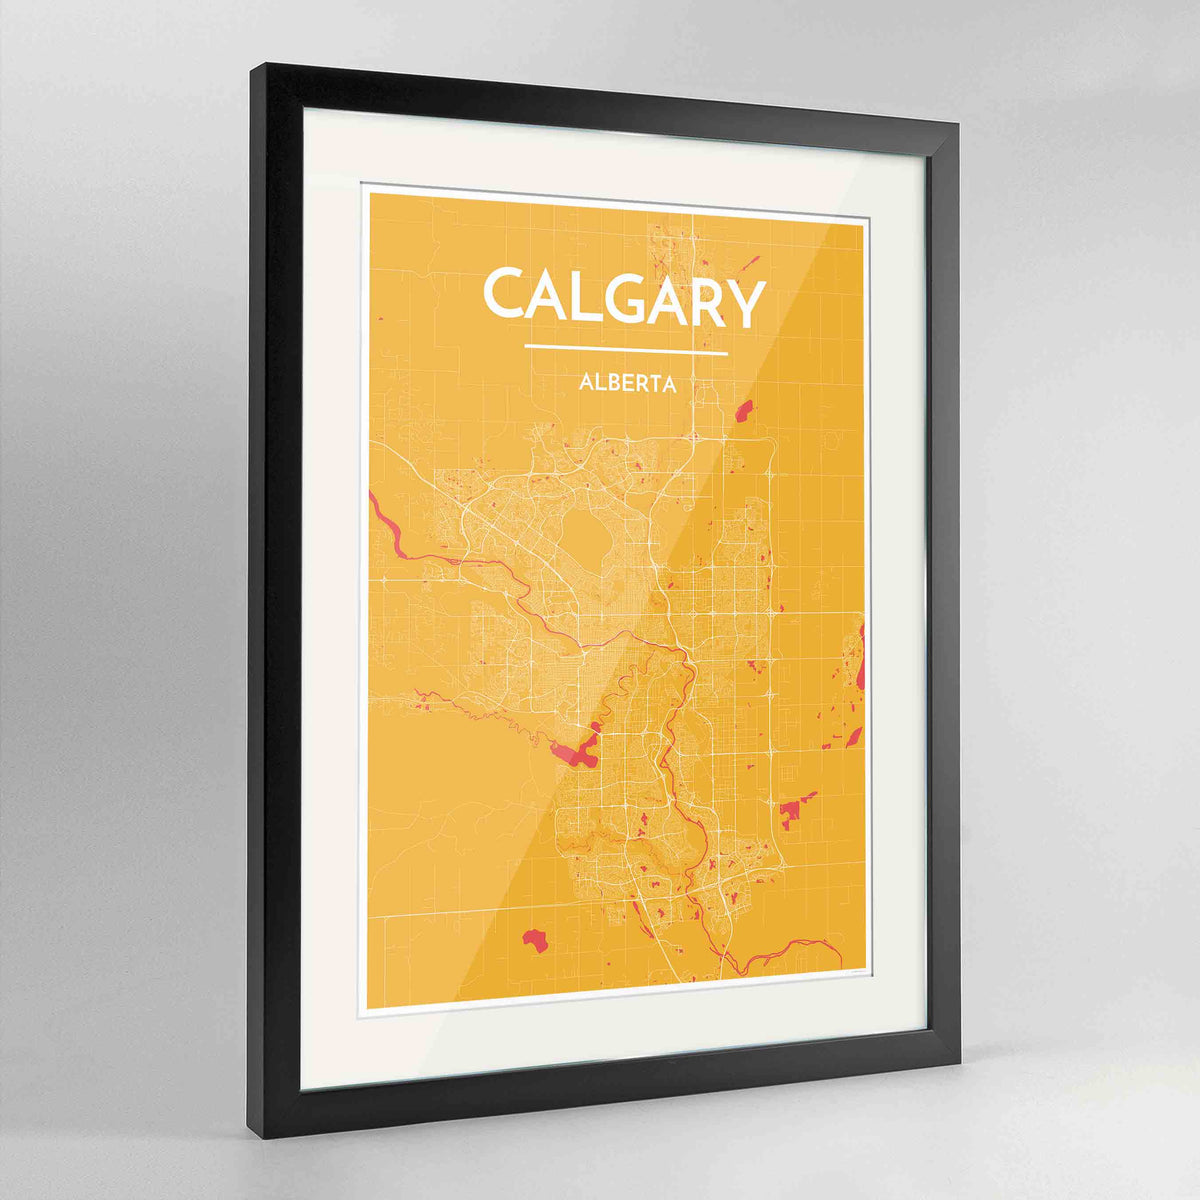 Framed Calgary City Map 24x36&quot; Contemporary Black frame Point Two Design Group